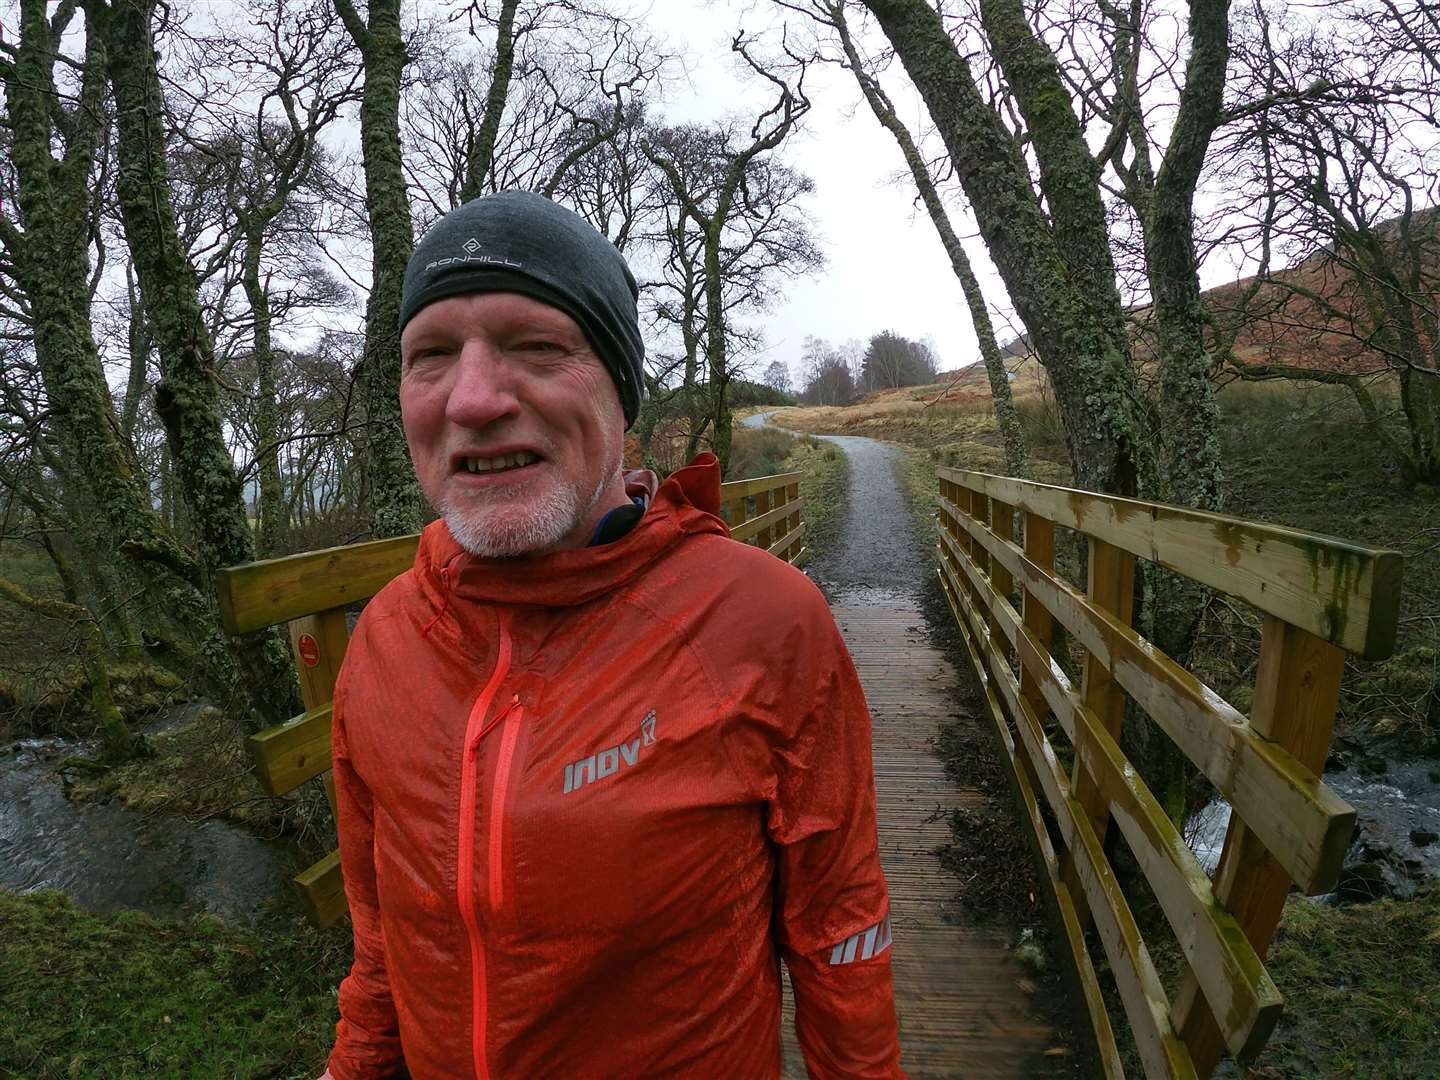 Graeme Ambrose on the South Loch Ness Trail which he pushed into becoming a reality.